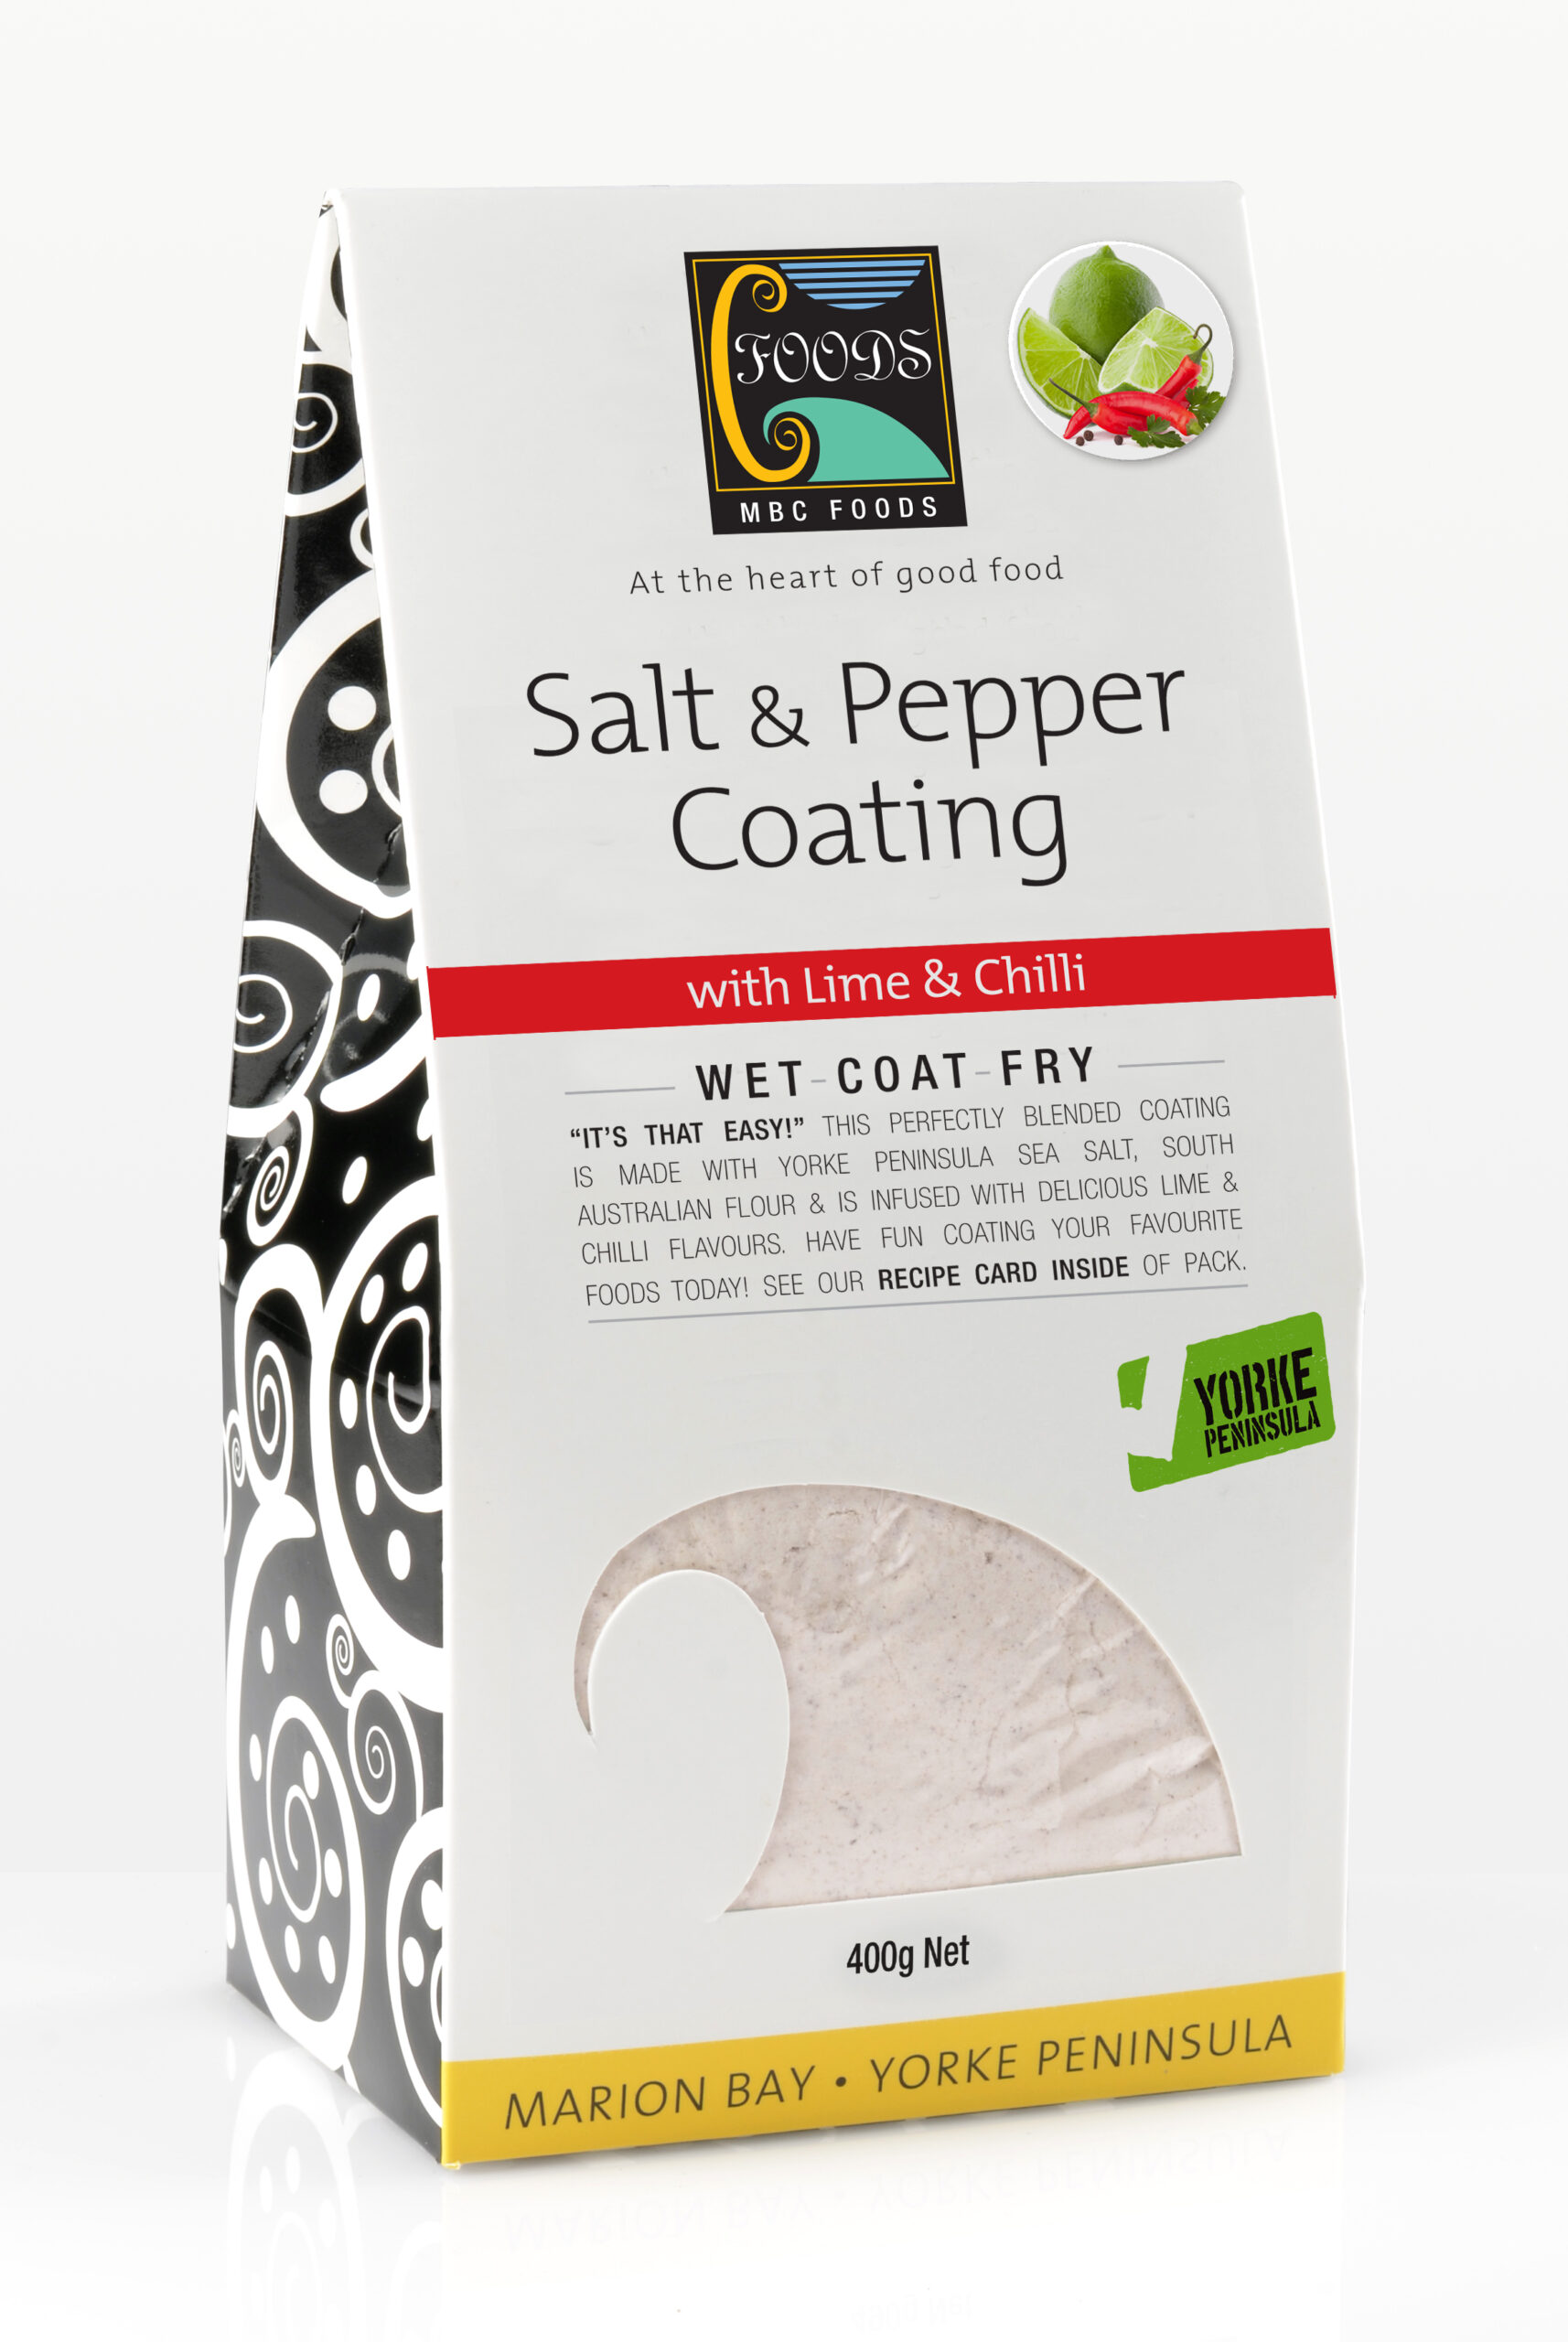 Packet of MBC Foods Salt & Pepper Coating Lime & Chilli viewed on an angle